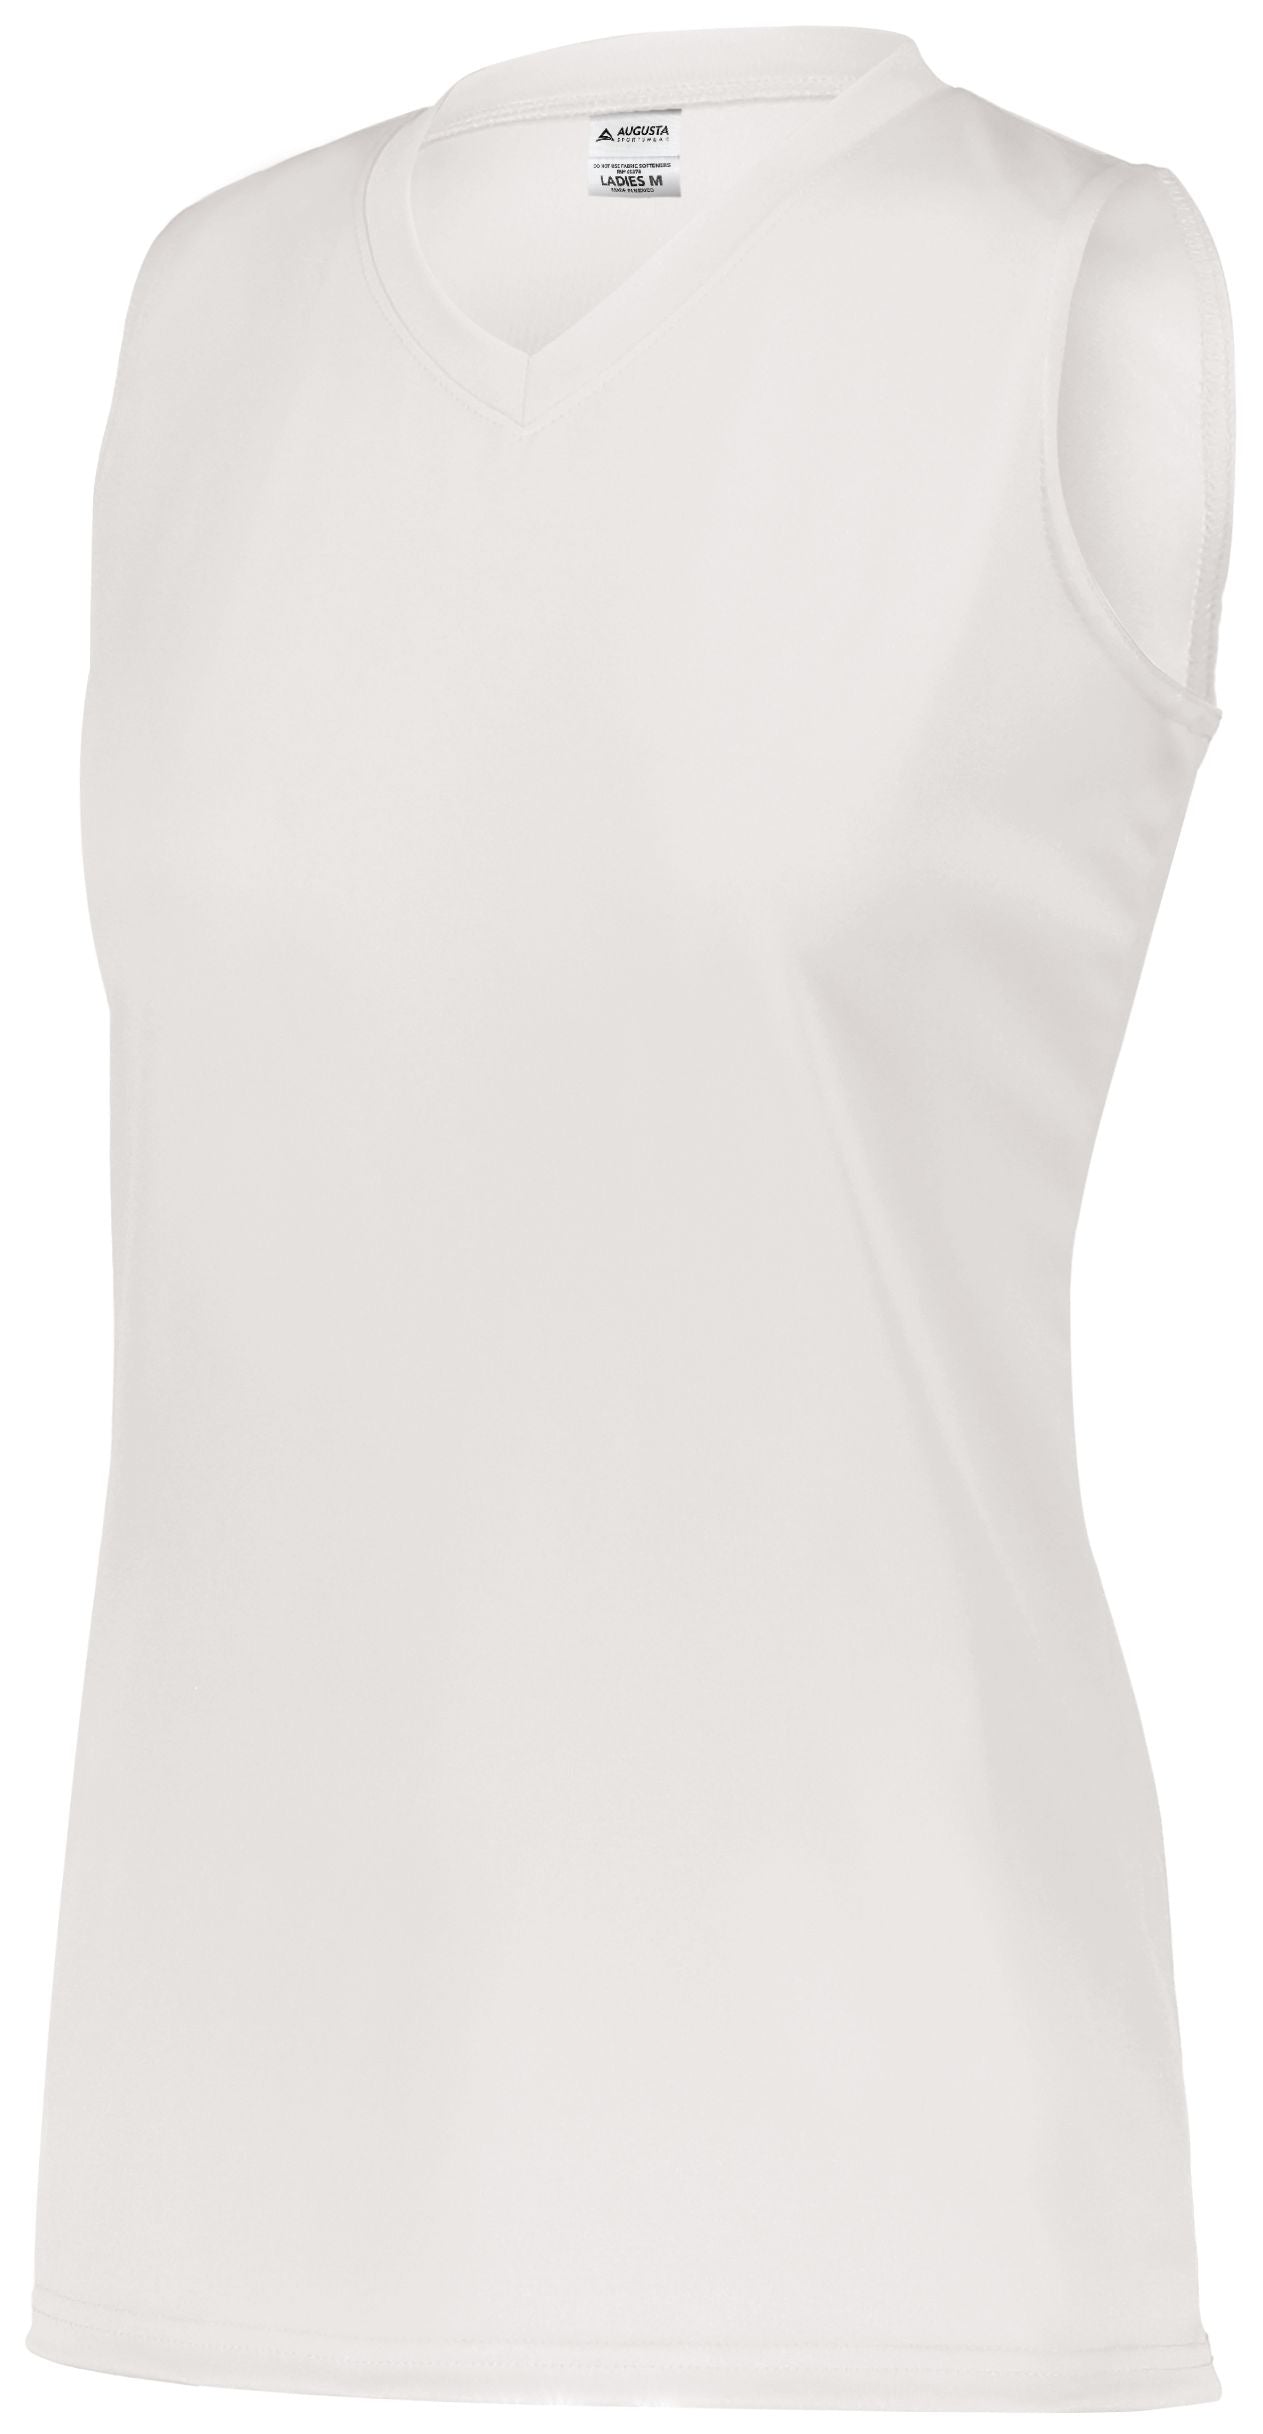 Augusta Sportswear Girls Attain Wicking Sleeveless Jersey in White  -Part of the Girls, Augusta-Products, Softball, Girls-Jersey, Shirts product lines at KanaleyCreations.com